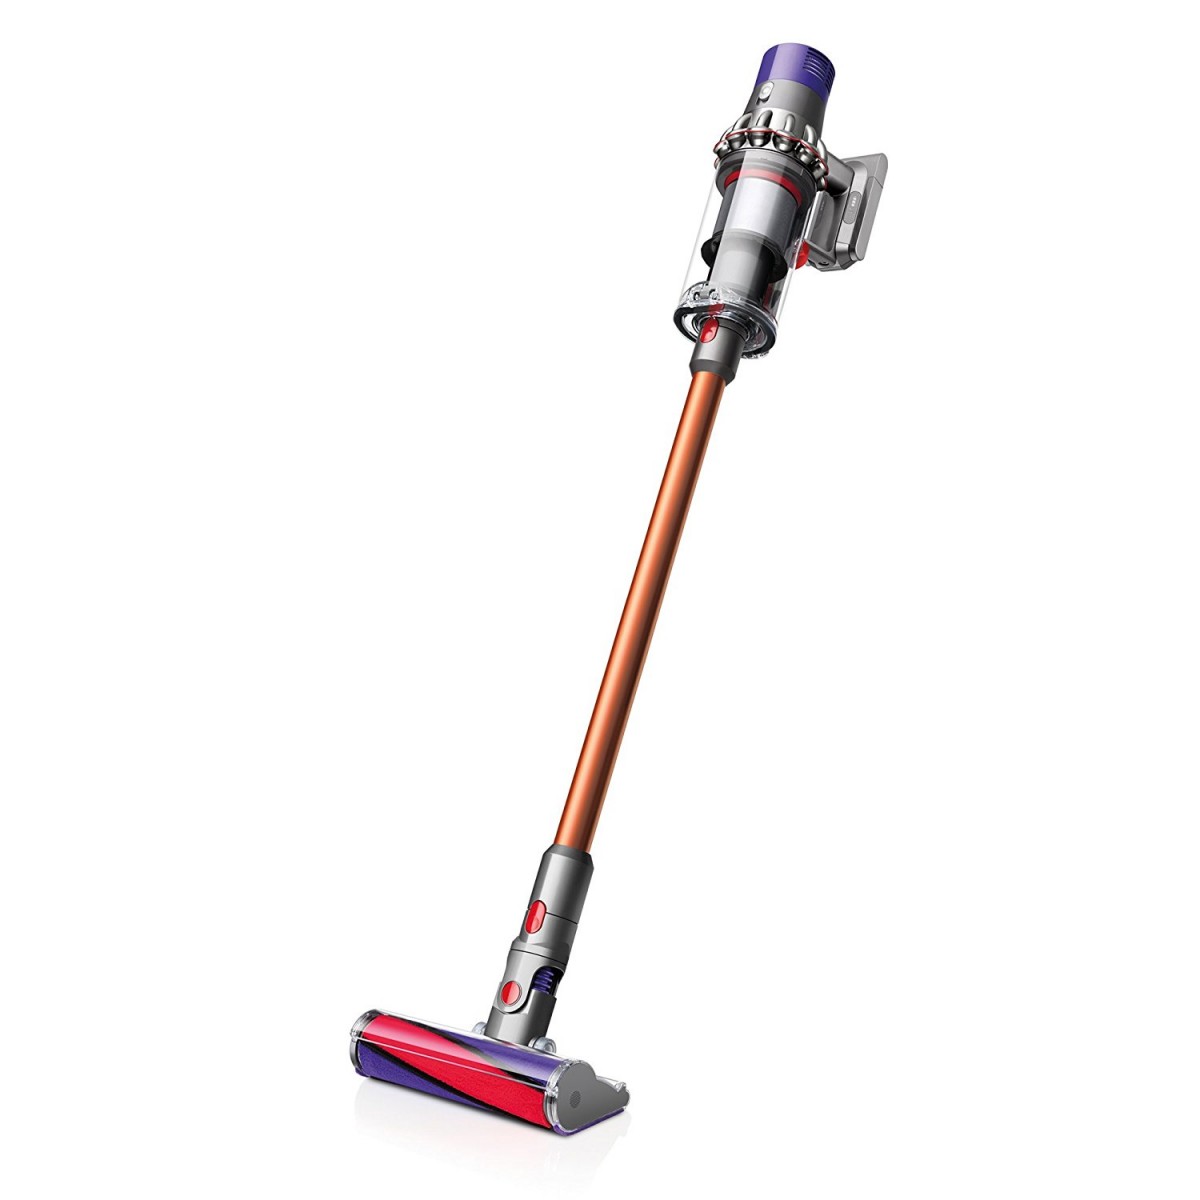 Dyson V10 Absolute Review (The Dyson V10 Absolute.)